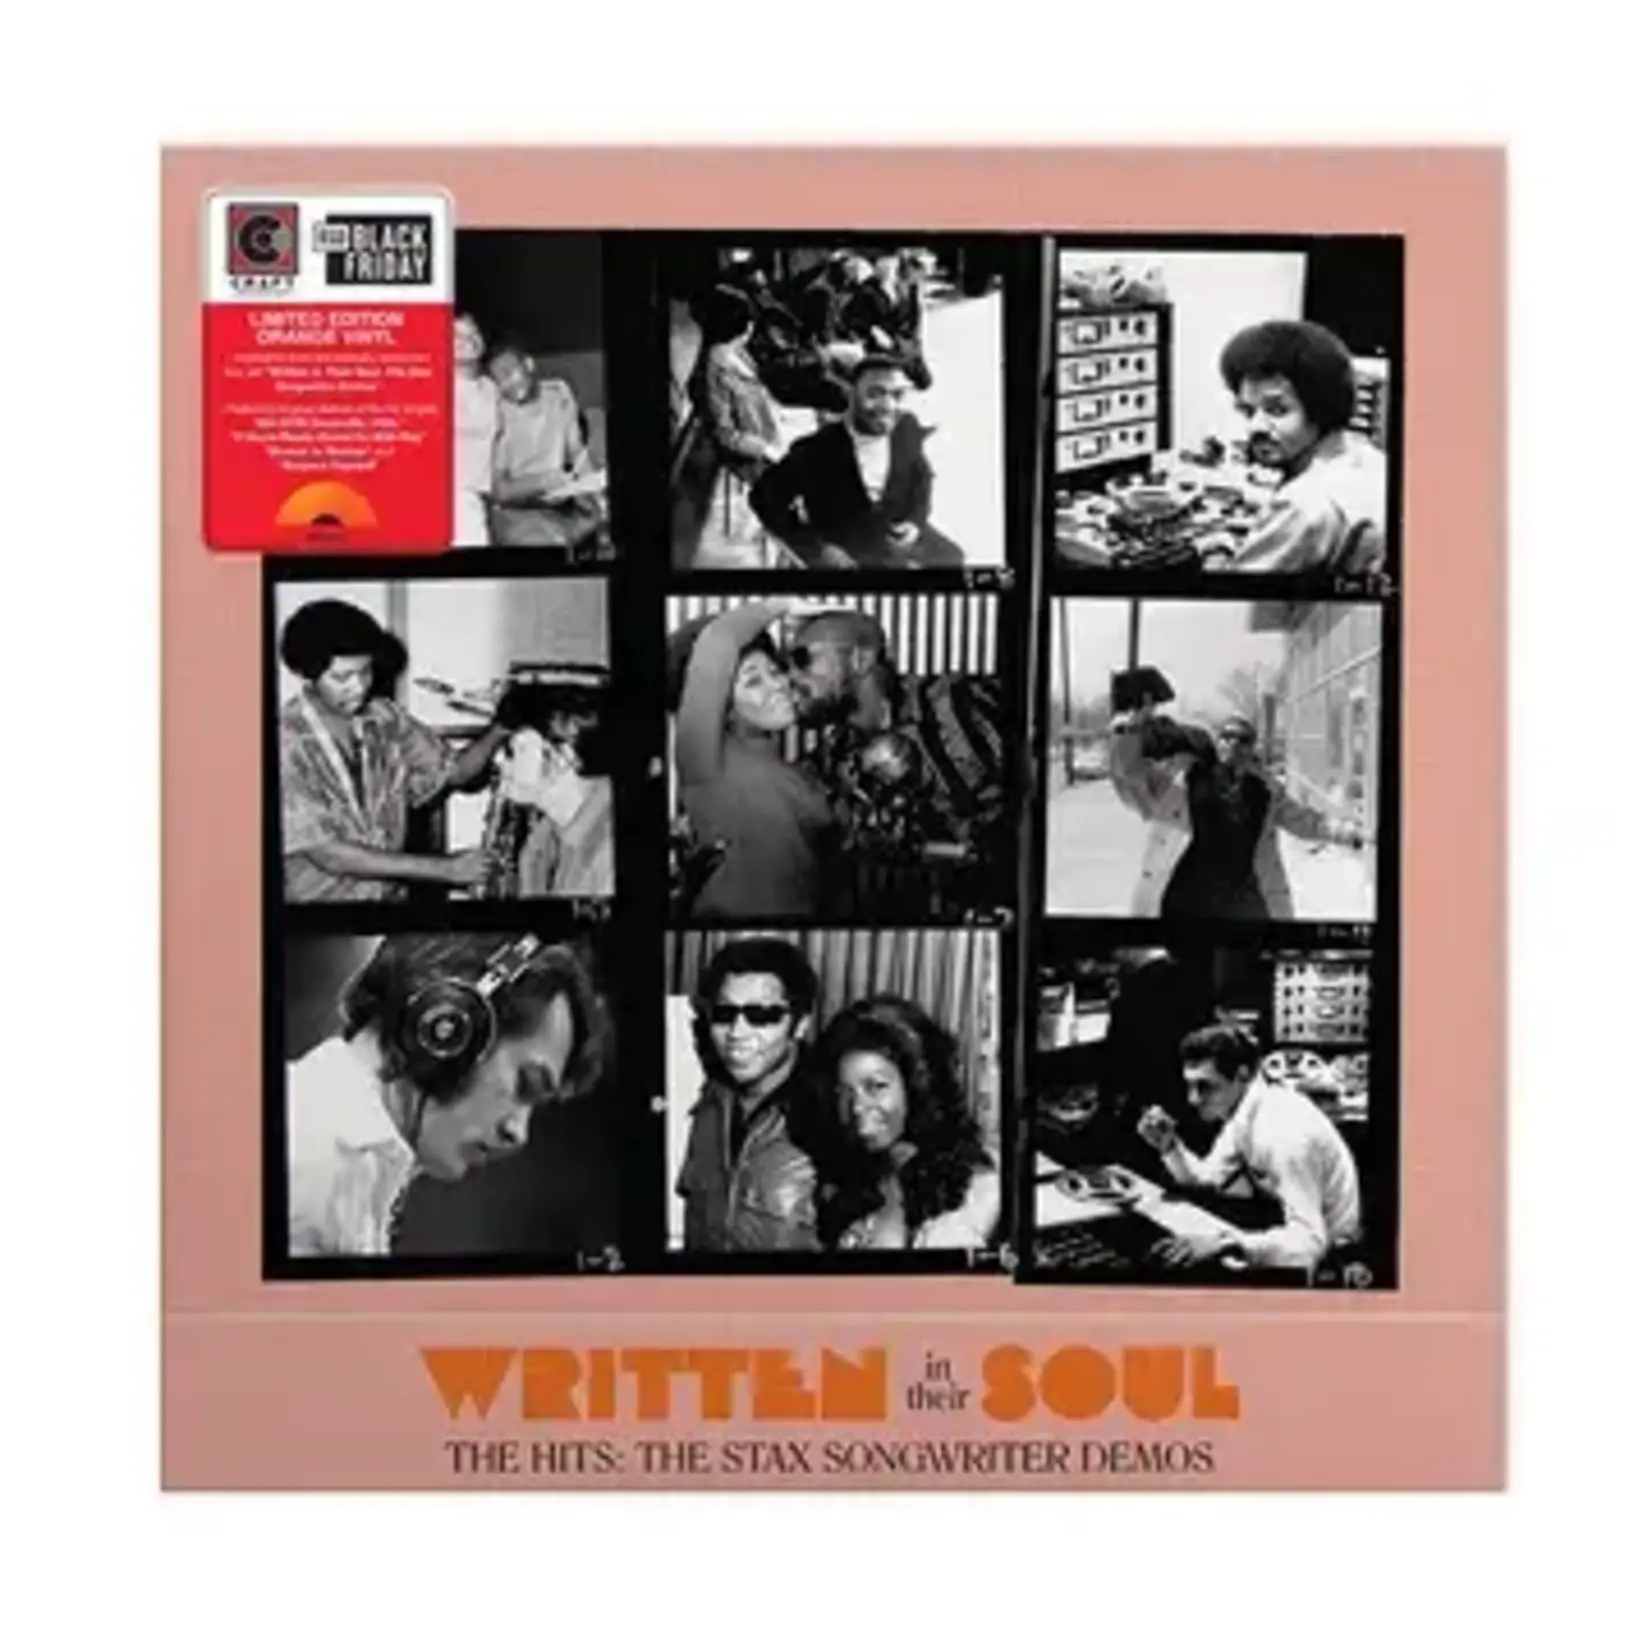 RSD Black Friday V/A - Written In Their Soul, The Hits: The Stax Songwriter Demos (LP) [Orange]